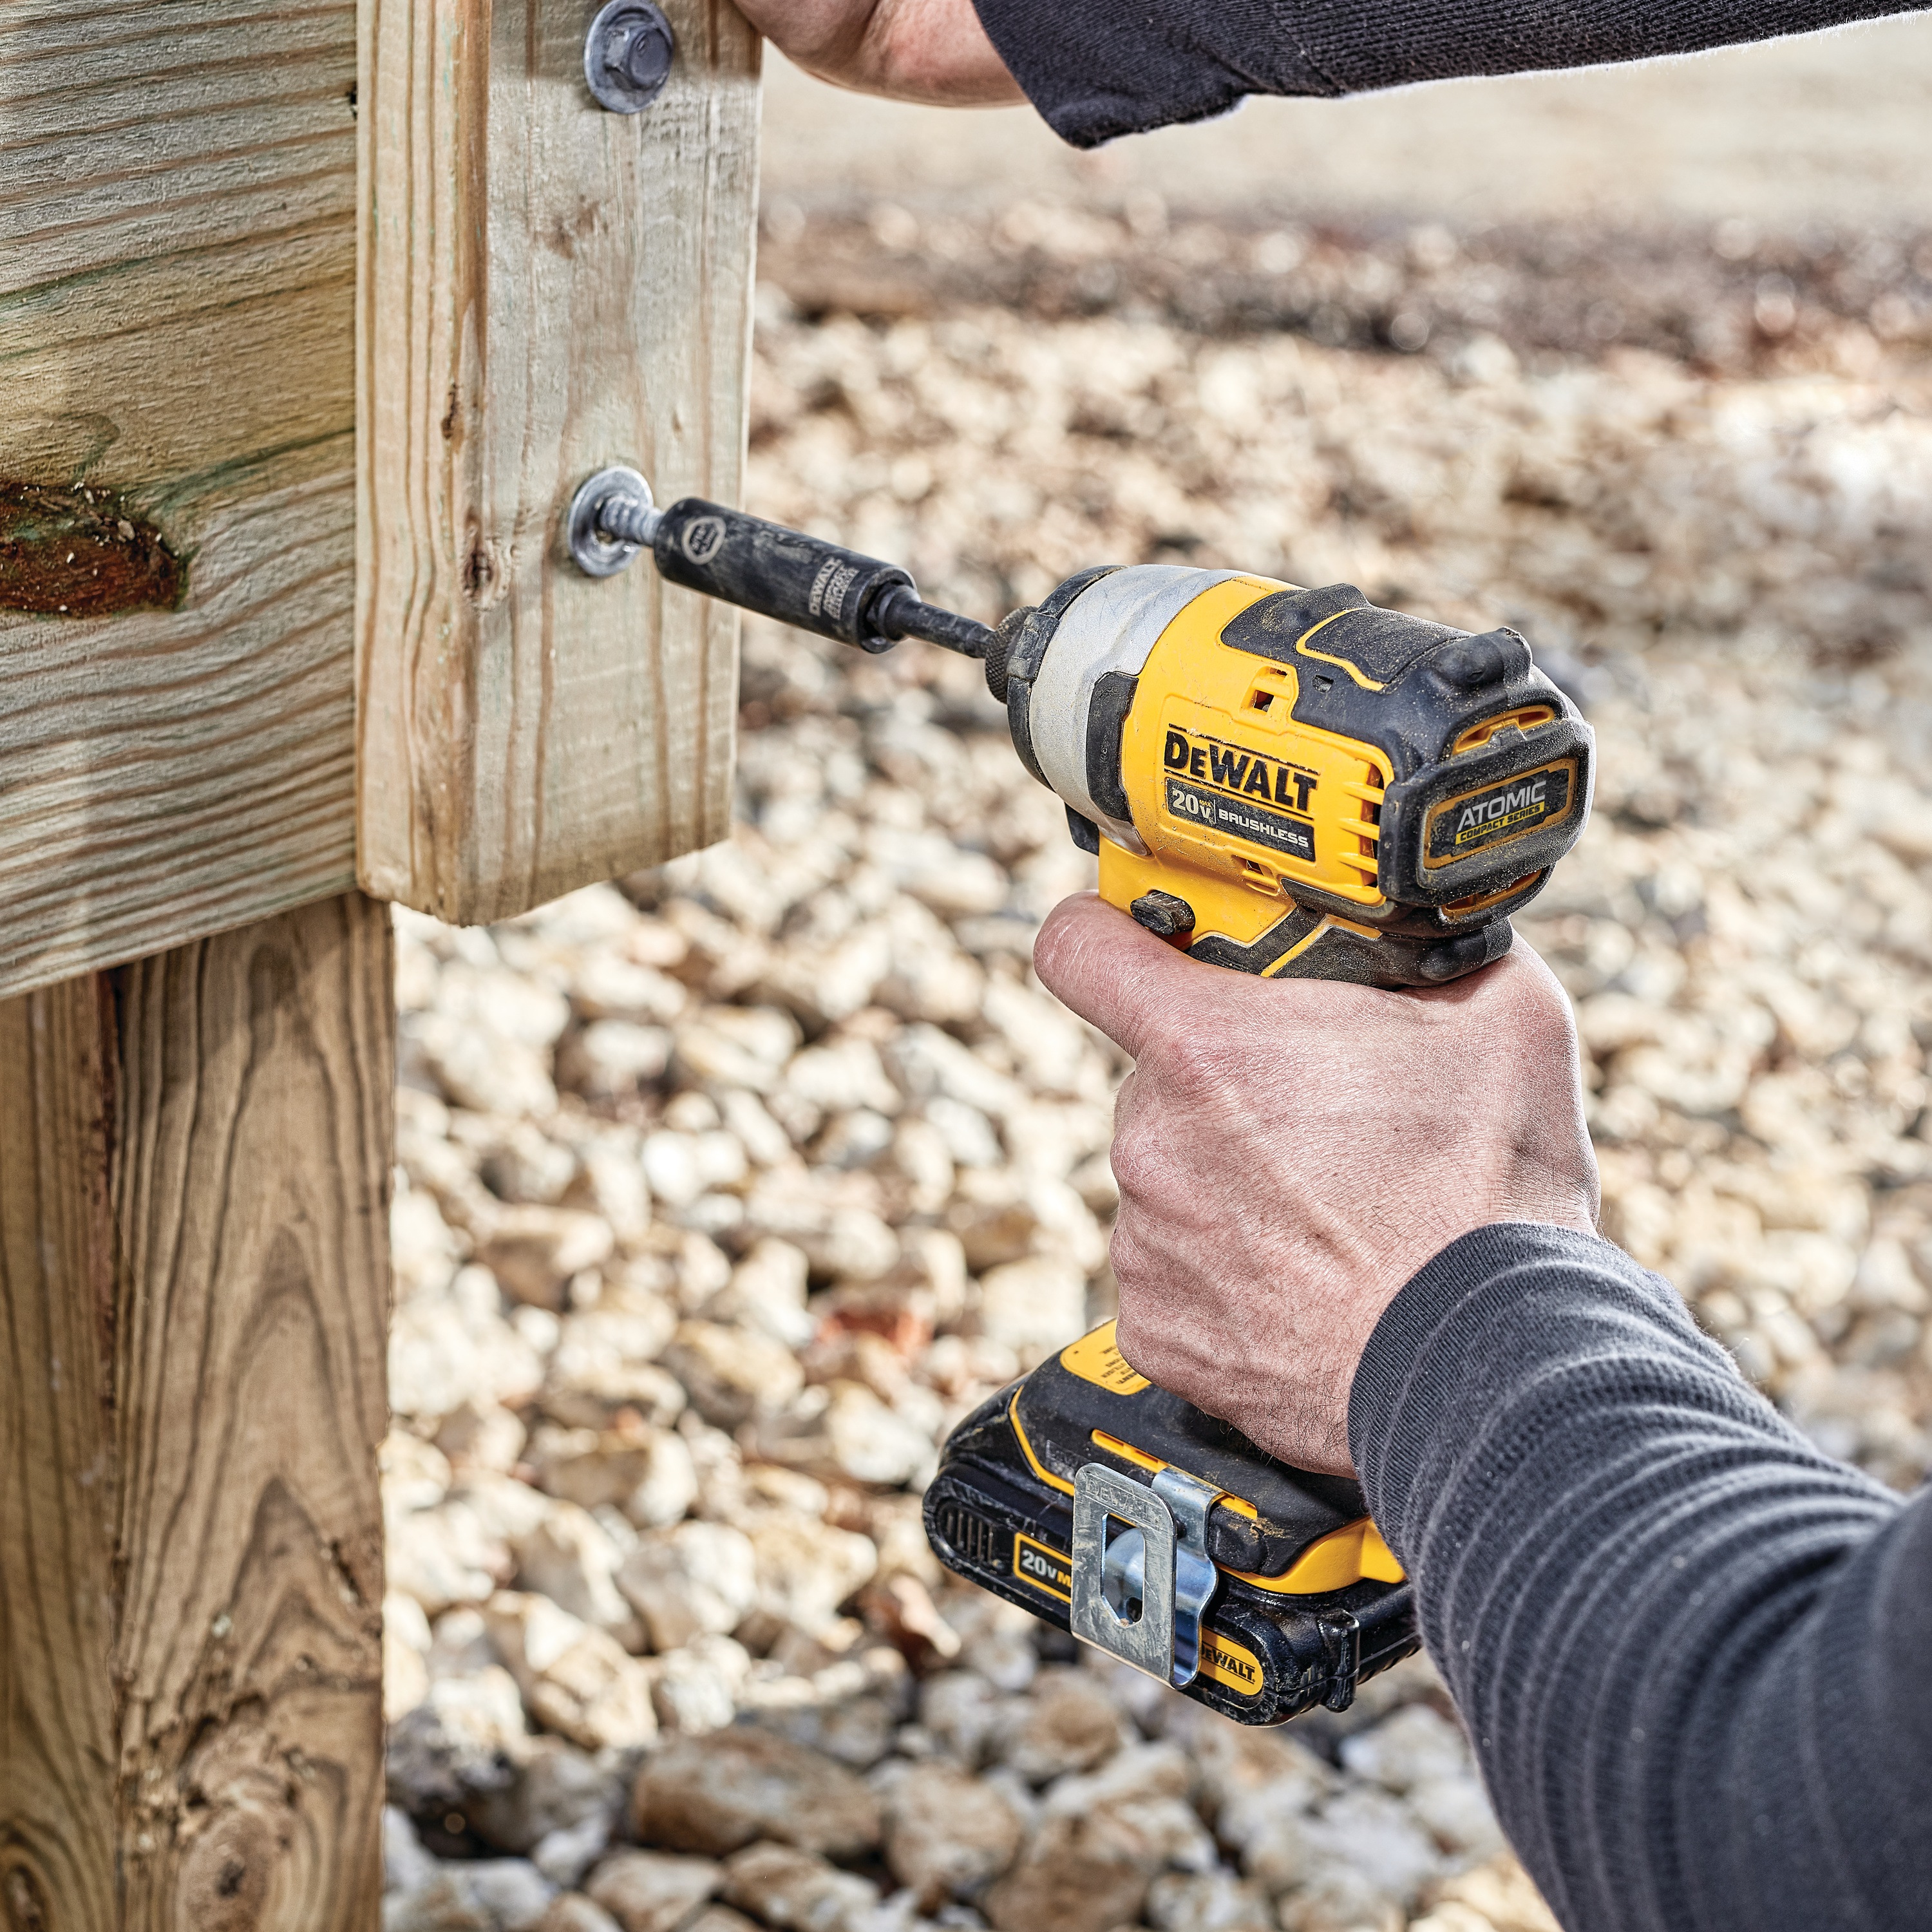 ATOMIC brushless cordless compact impact driver kit two battery kit fastening bolt on wood.